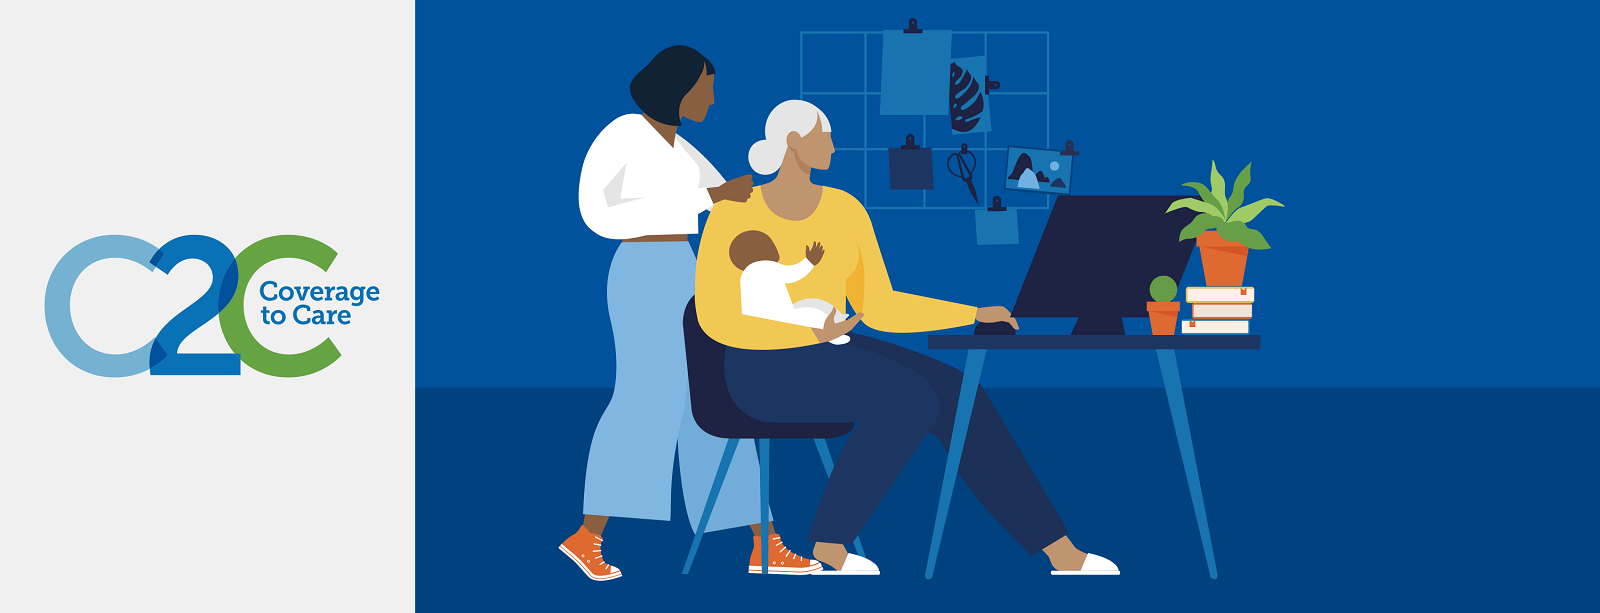 Coverage to care banner, graphic of two black women, one seated holding a baby and the other with her hand on the shoulder of the seated one. The seated one uses the computer at the desk she's seated at